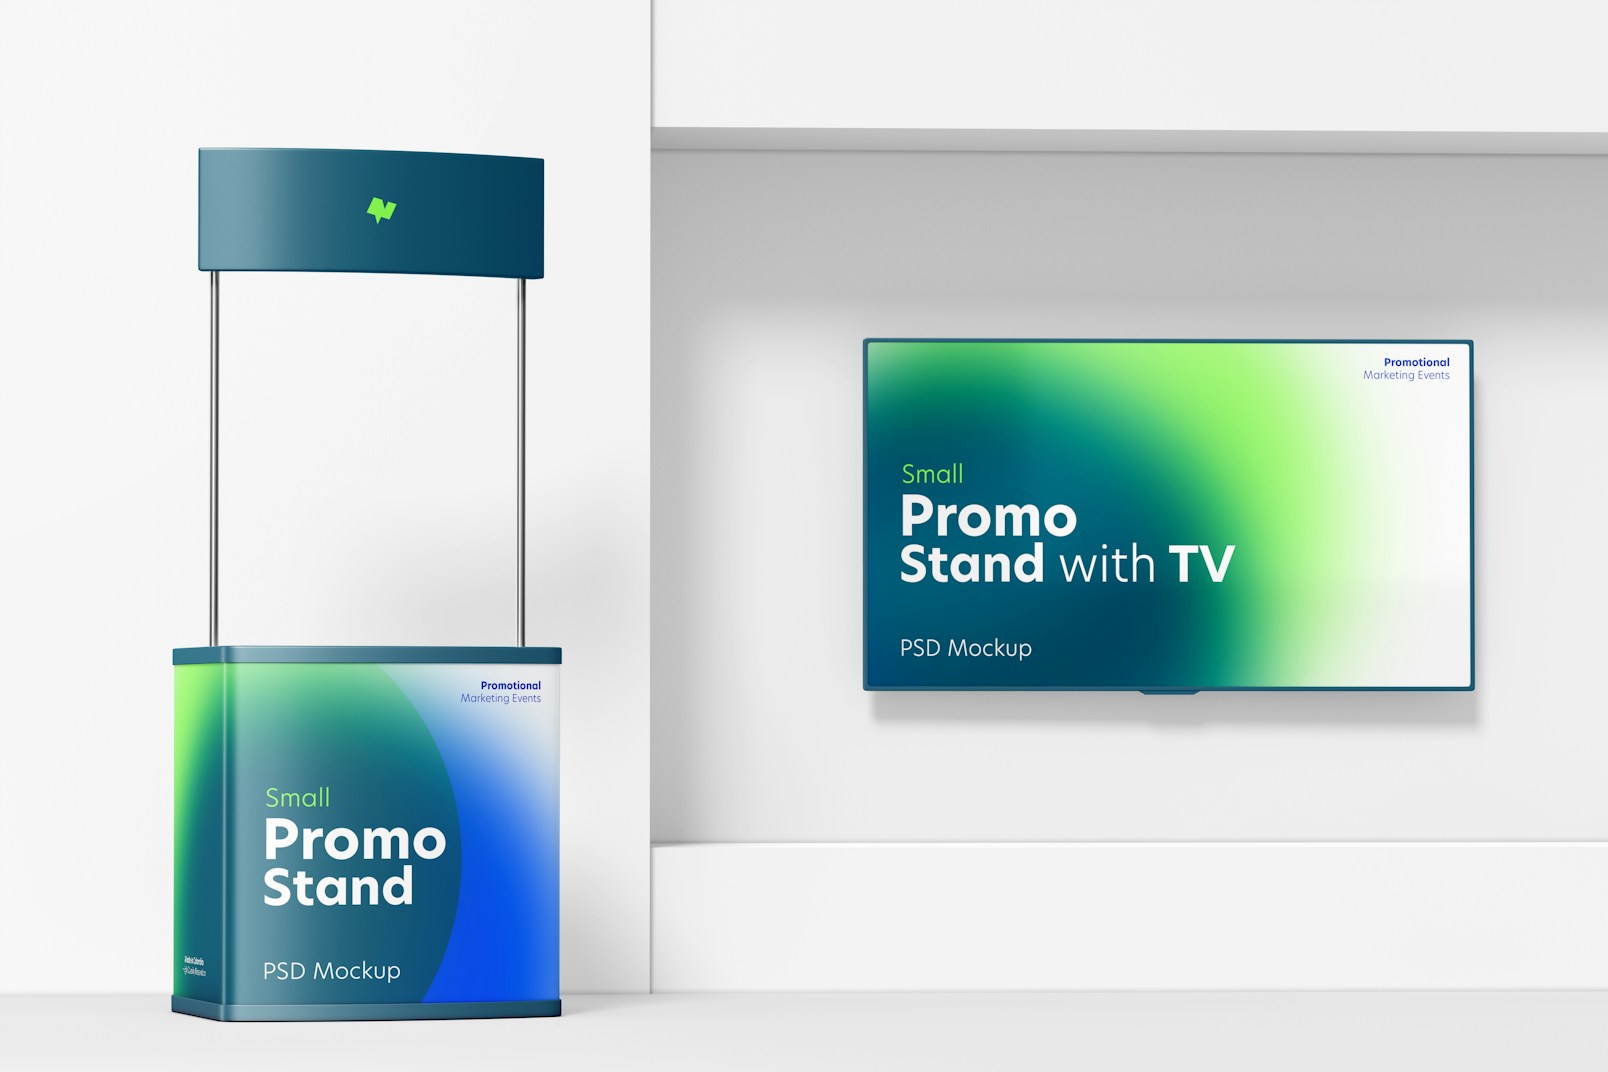 Small Promo Stand with TV Mockup